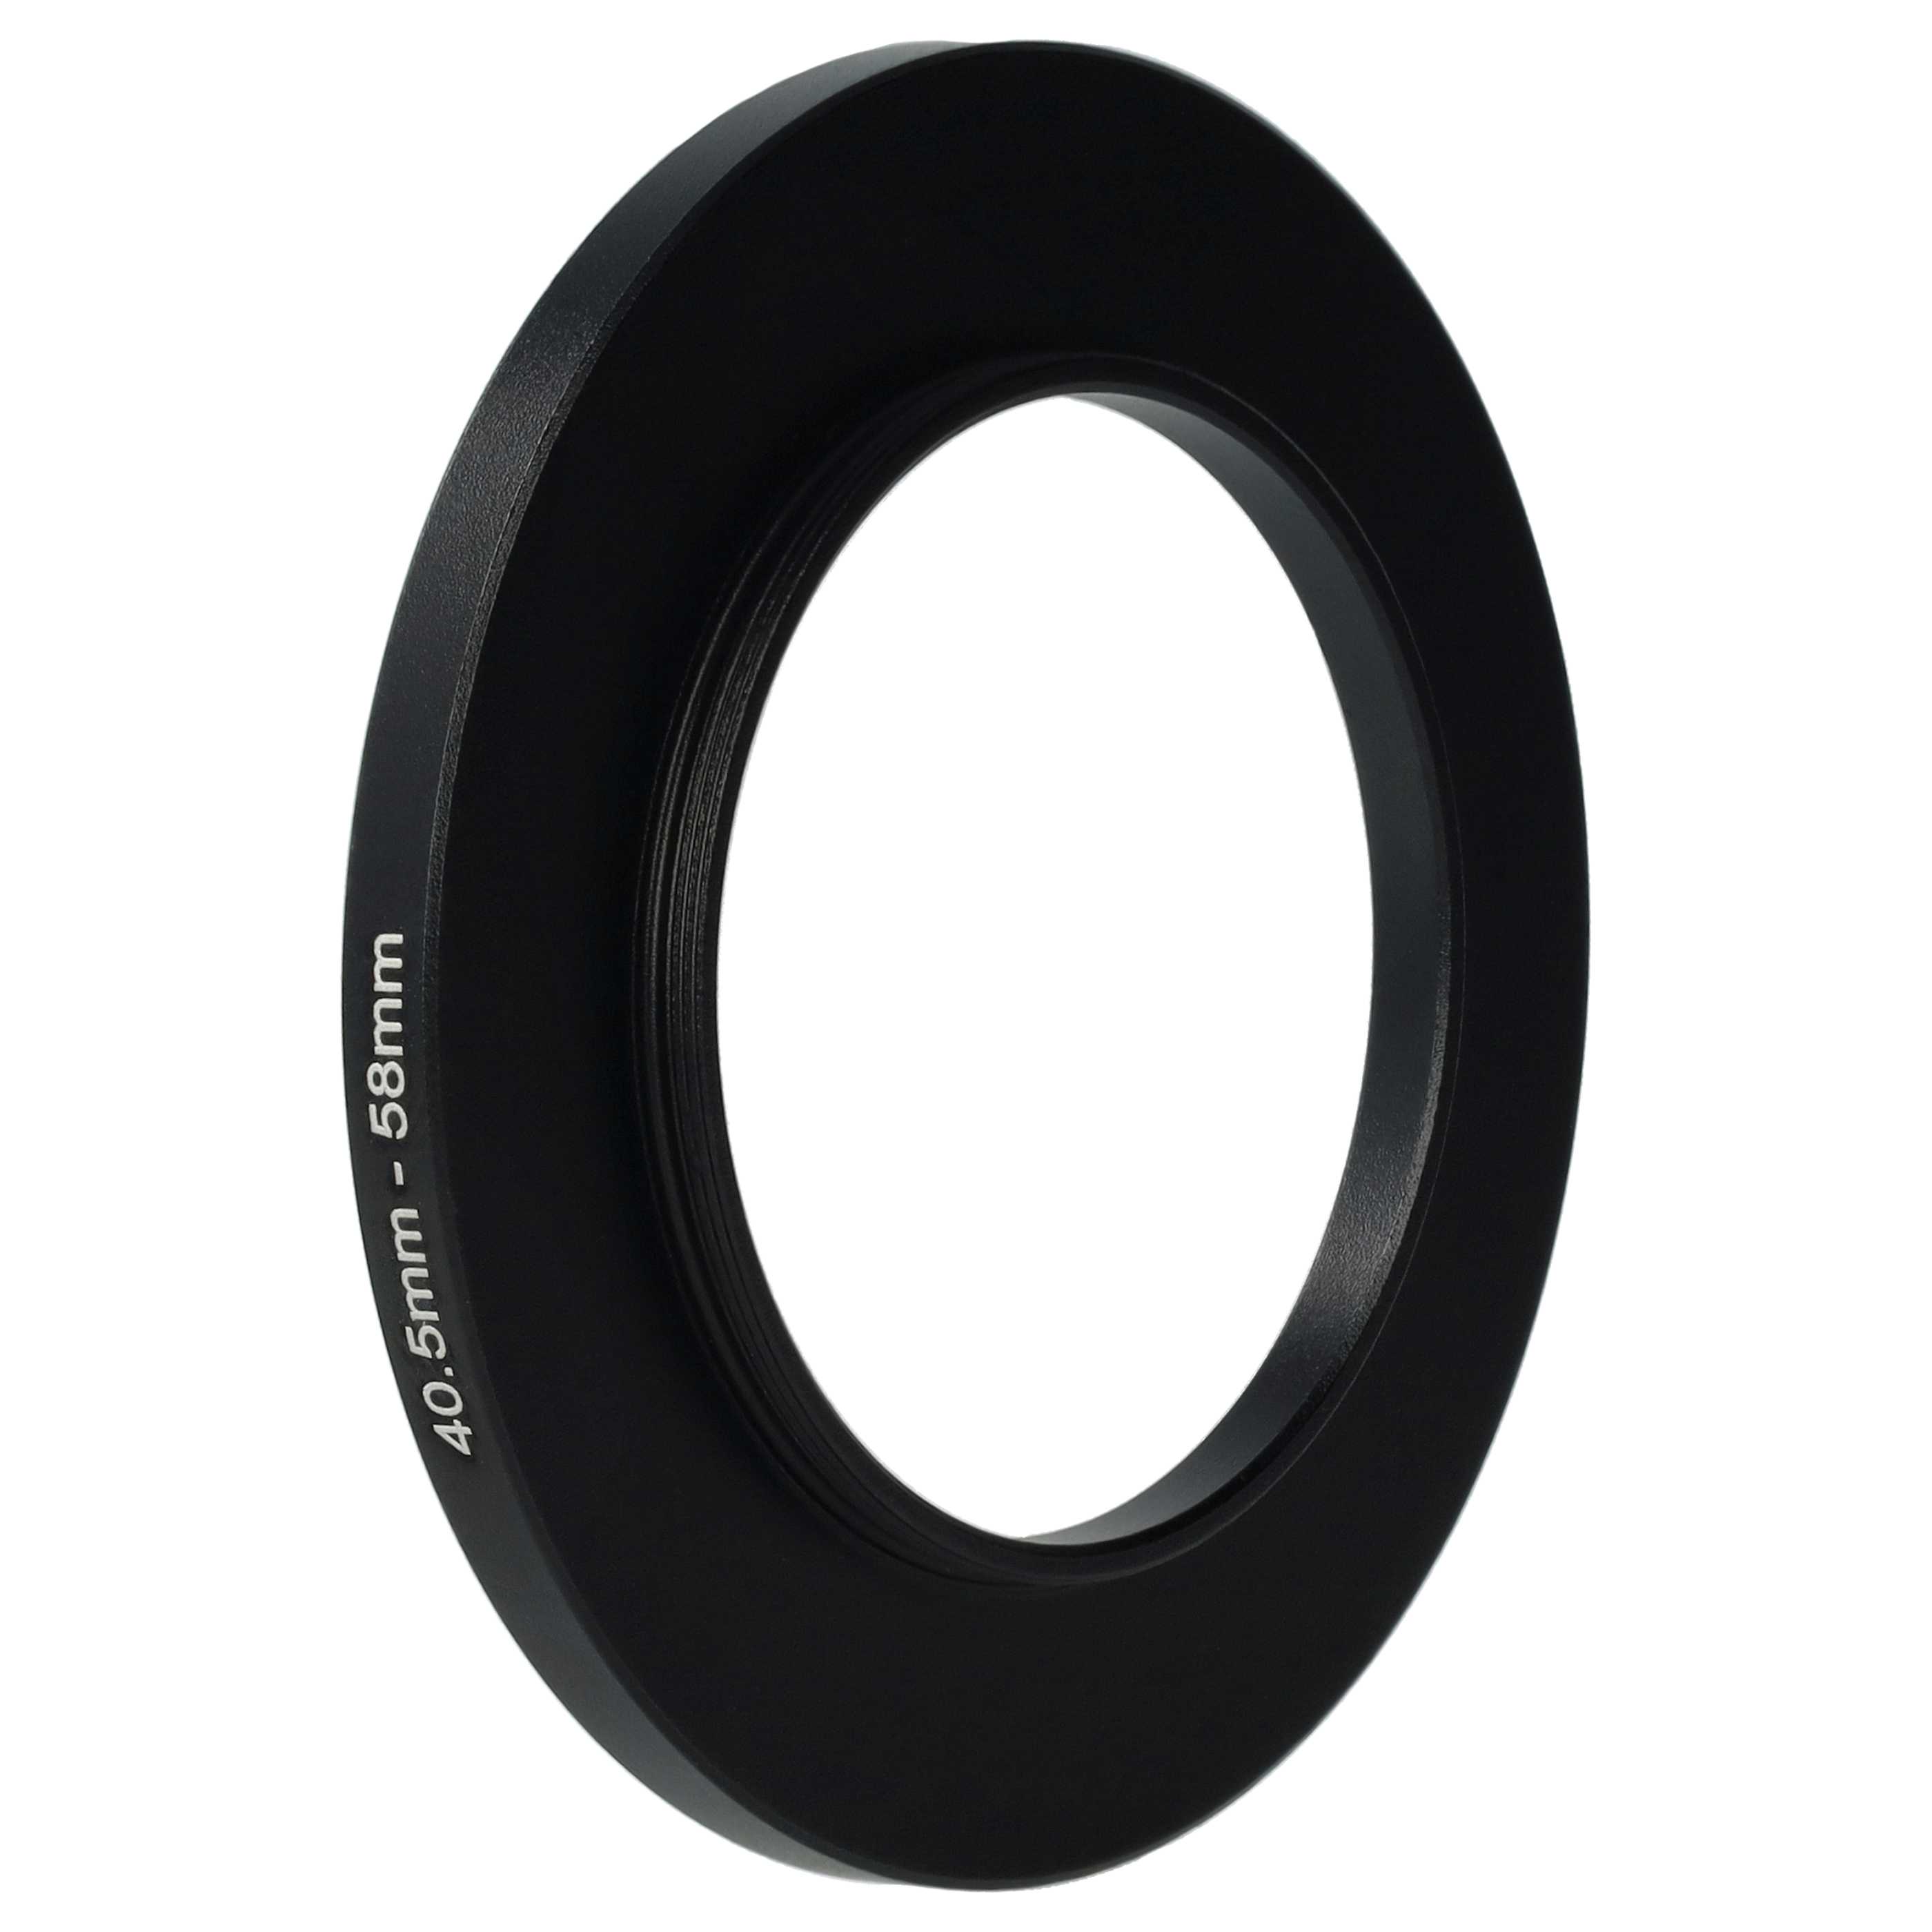 Step-Up Ring Adapter of 40.5 mm to 58 mmfor various Camera Lens - Filter Adapter